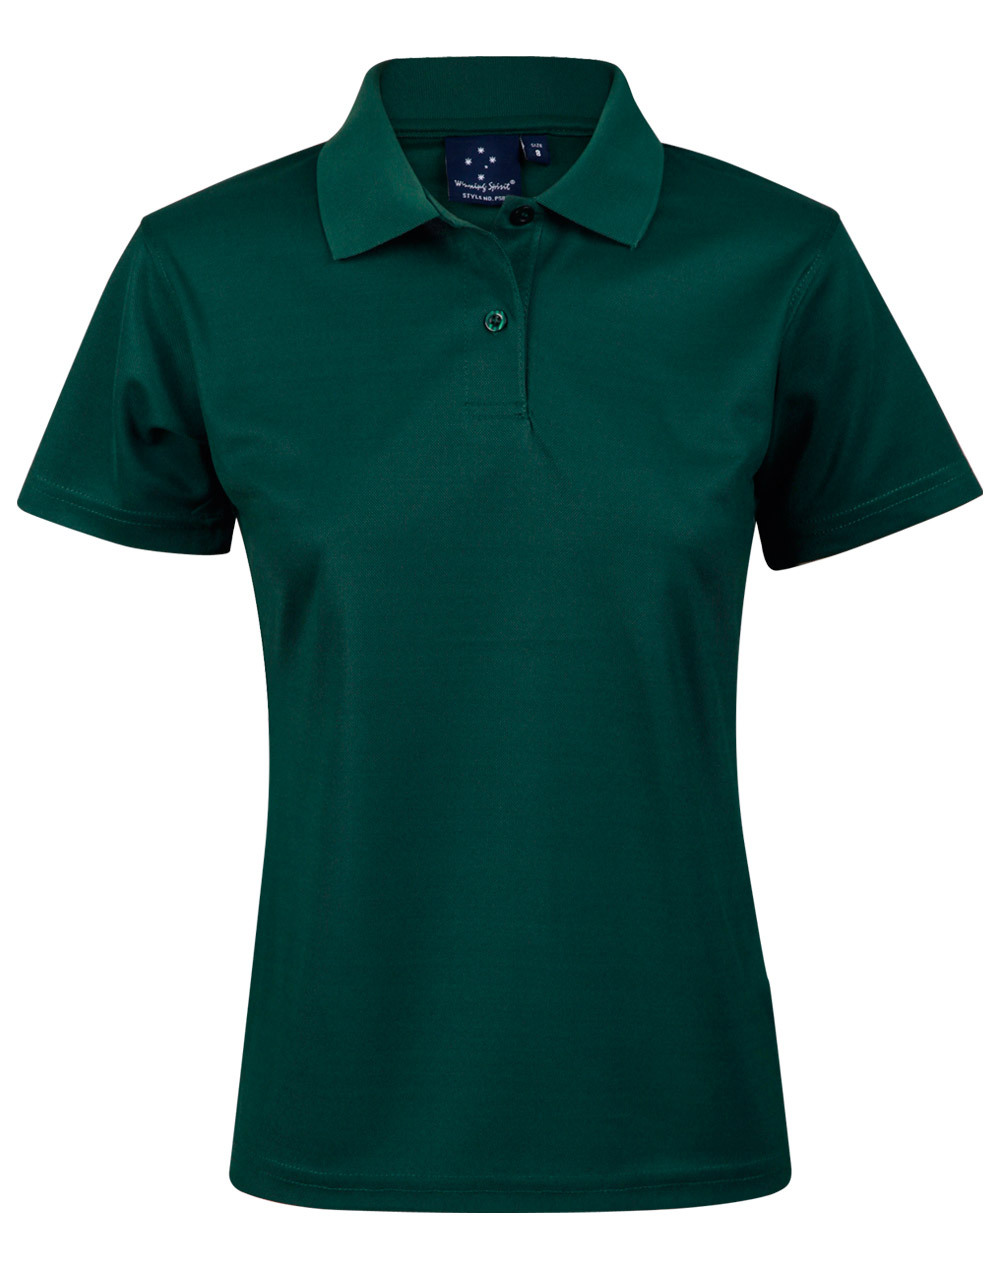 PS82 VERVE Polyester Ladies Polo Shirt